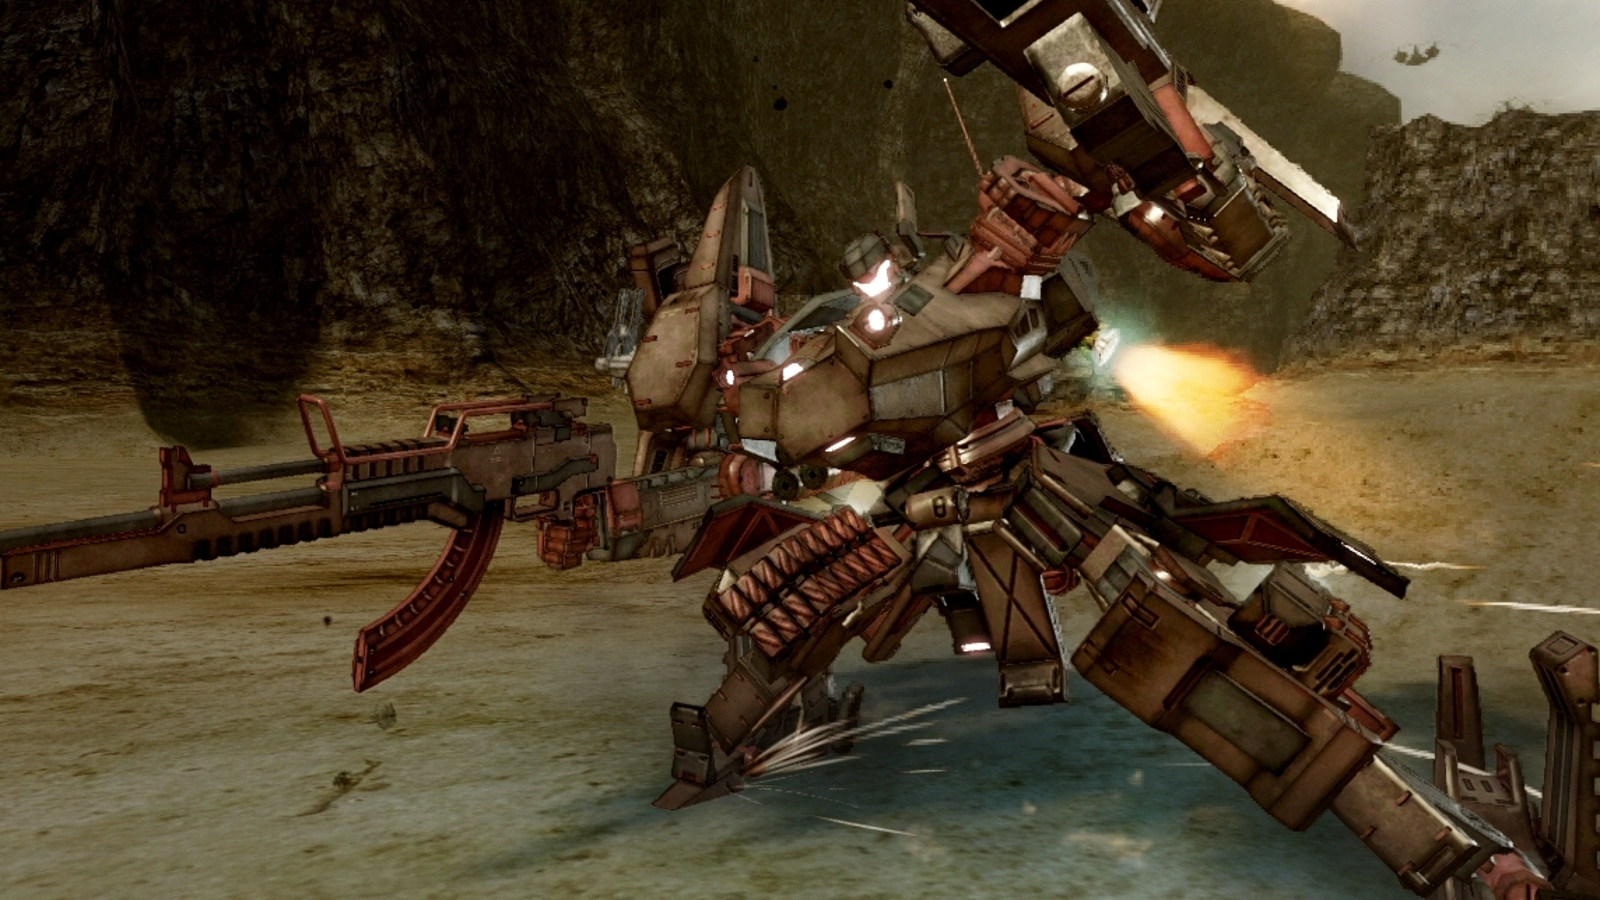 Armored Core V Preview - Armored Core V Multiplayer Trailer